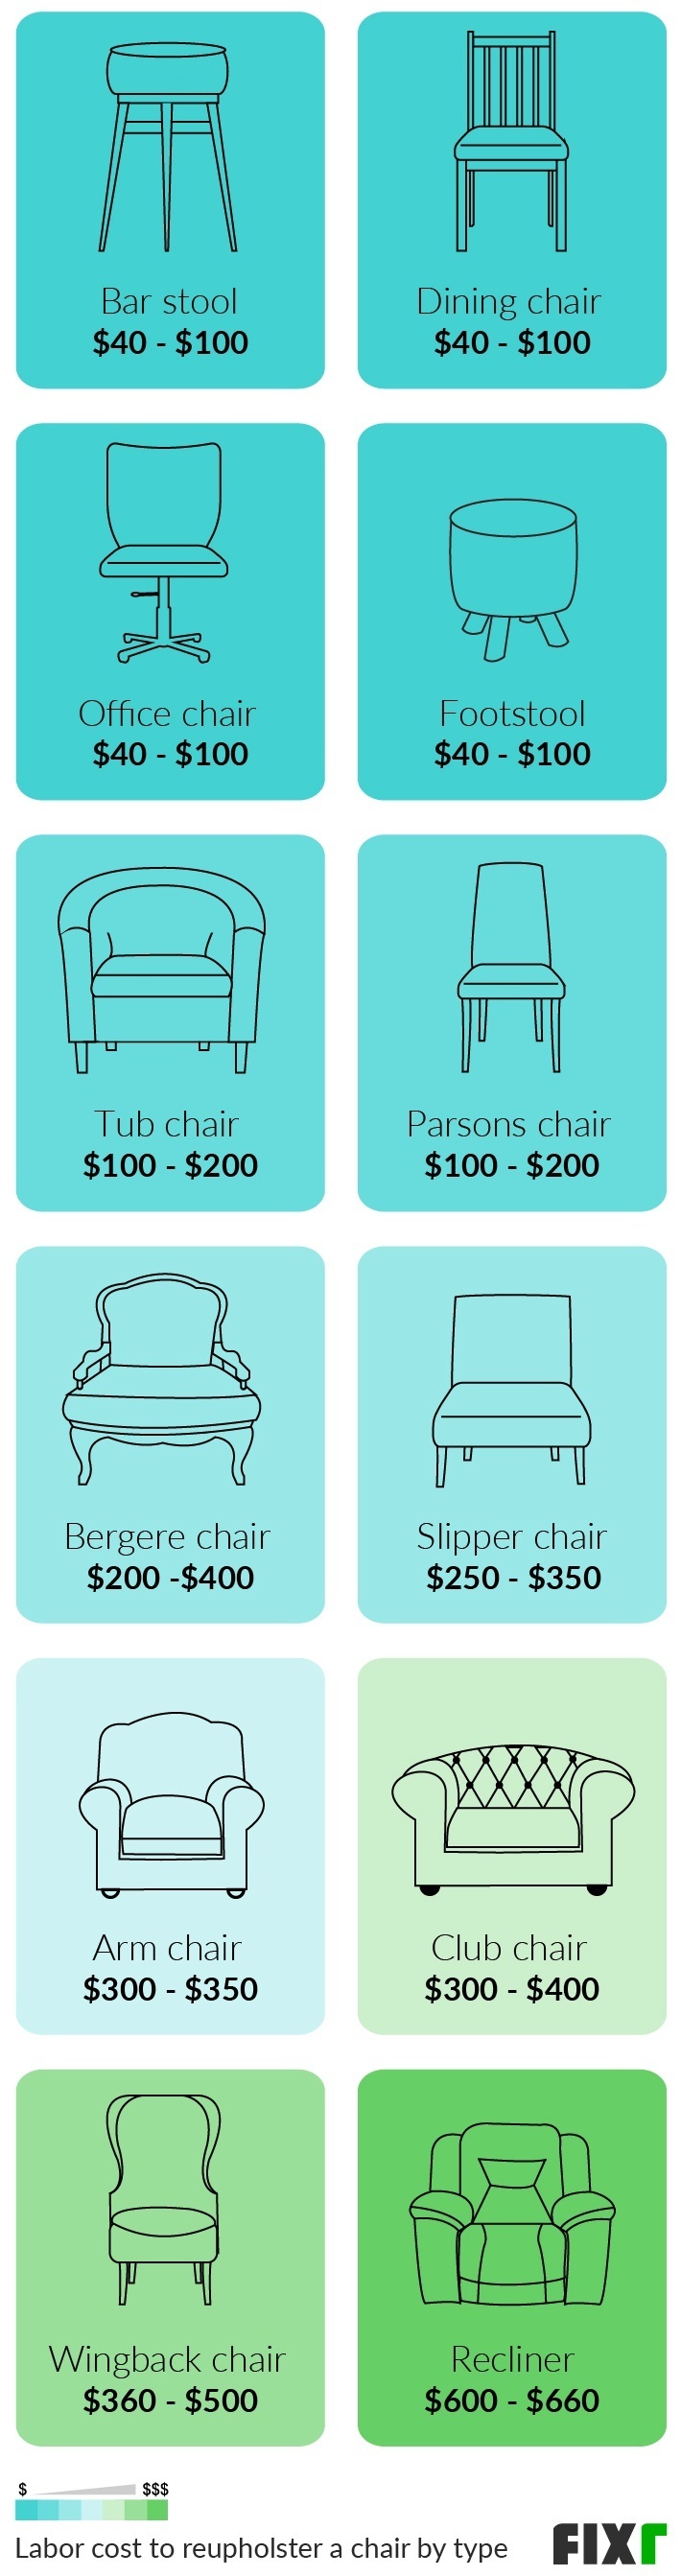 2021 Cost To Reupholster A Chair, How Much Does It Cost To Recover A Leather Chair